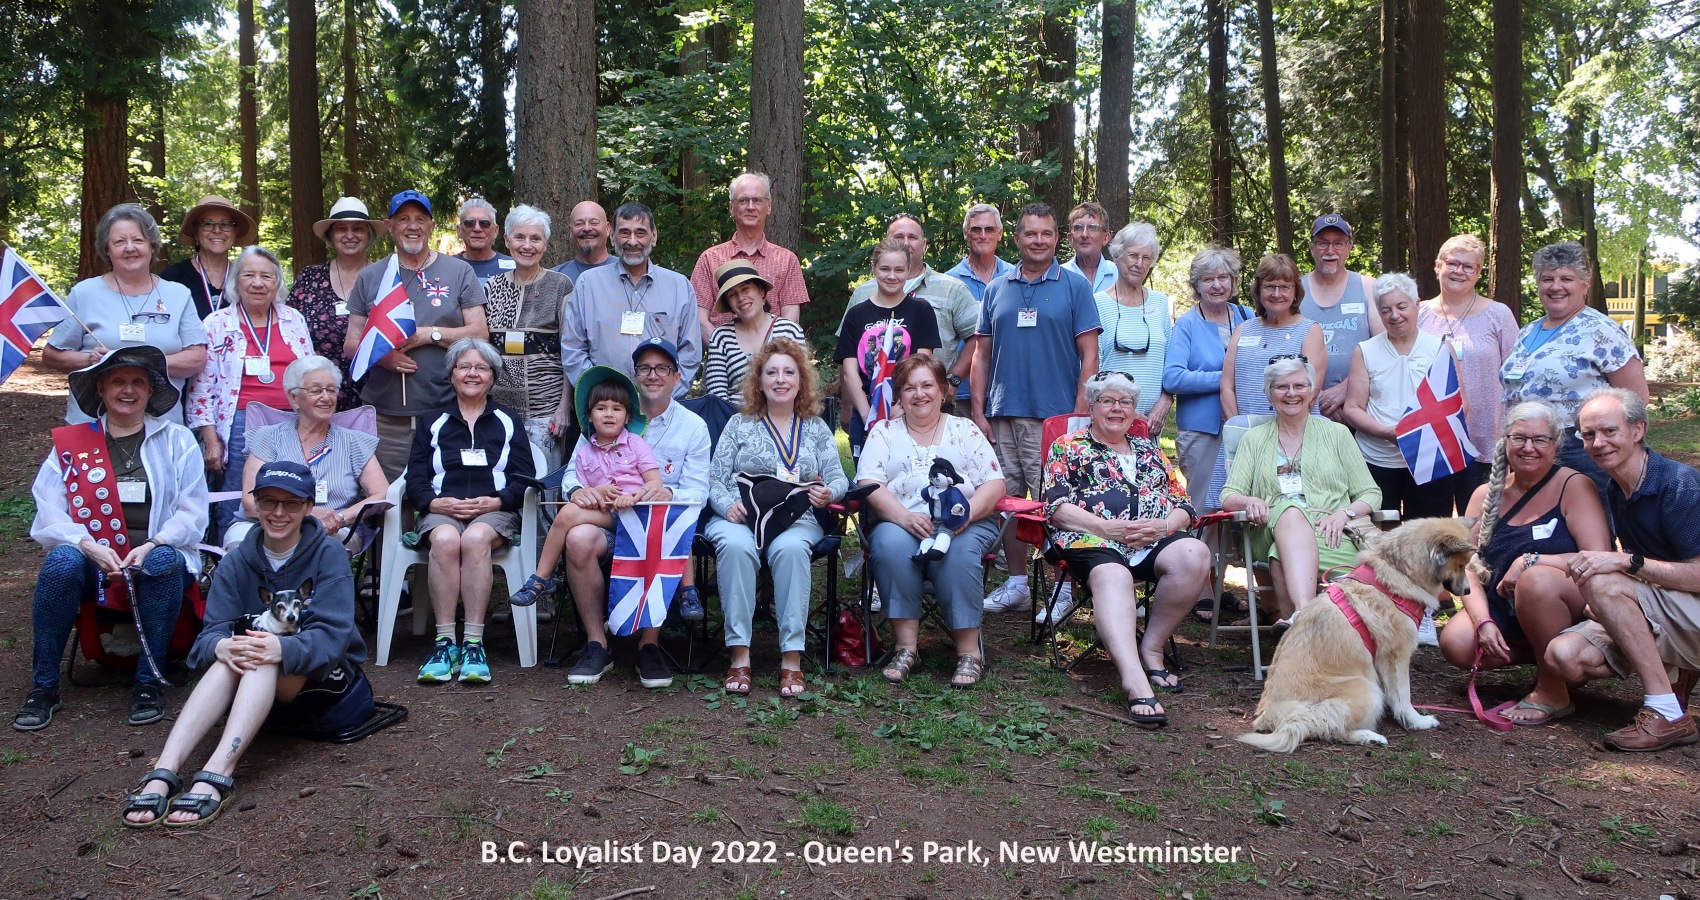 Vancouver Branch members & guests at our 2022 picnic honouring both BC Loyalist Day and the 70th anniversary of Her Majesty's accession to the Throne